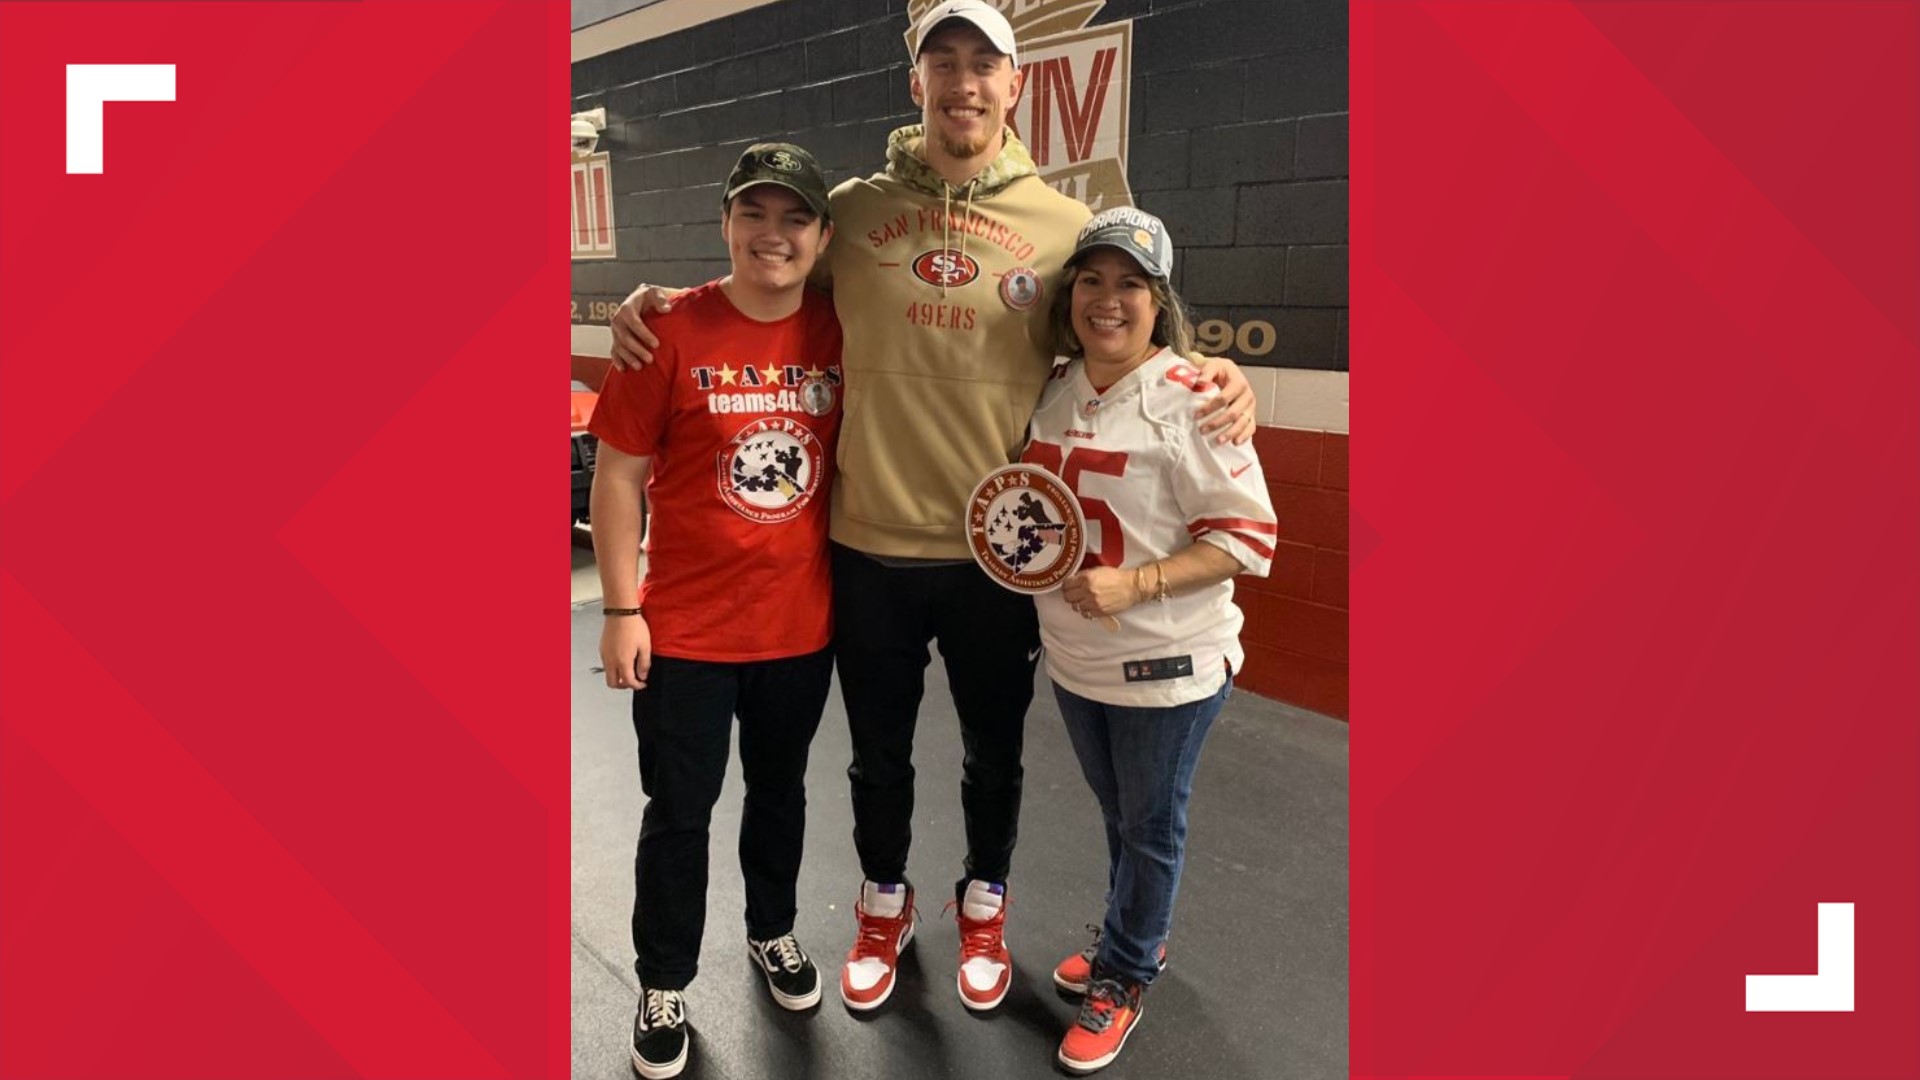 A Sacramento family is heading to Super Bowl LIV thanks to 49ers star tight end George Kittle, USAA and the Tragedy Assistance Program for Survivors.